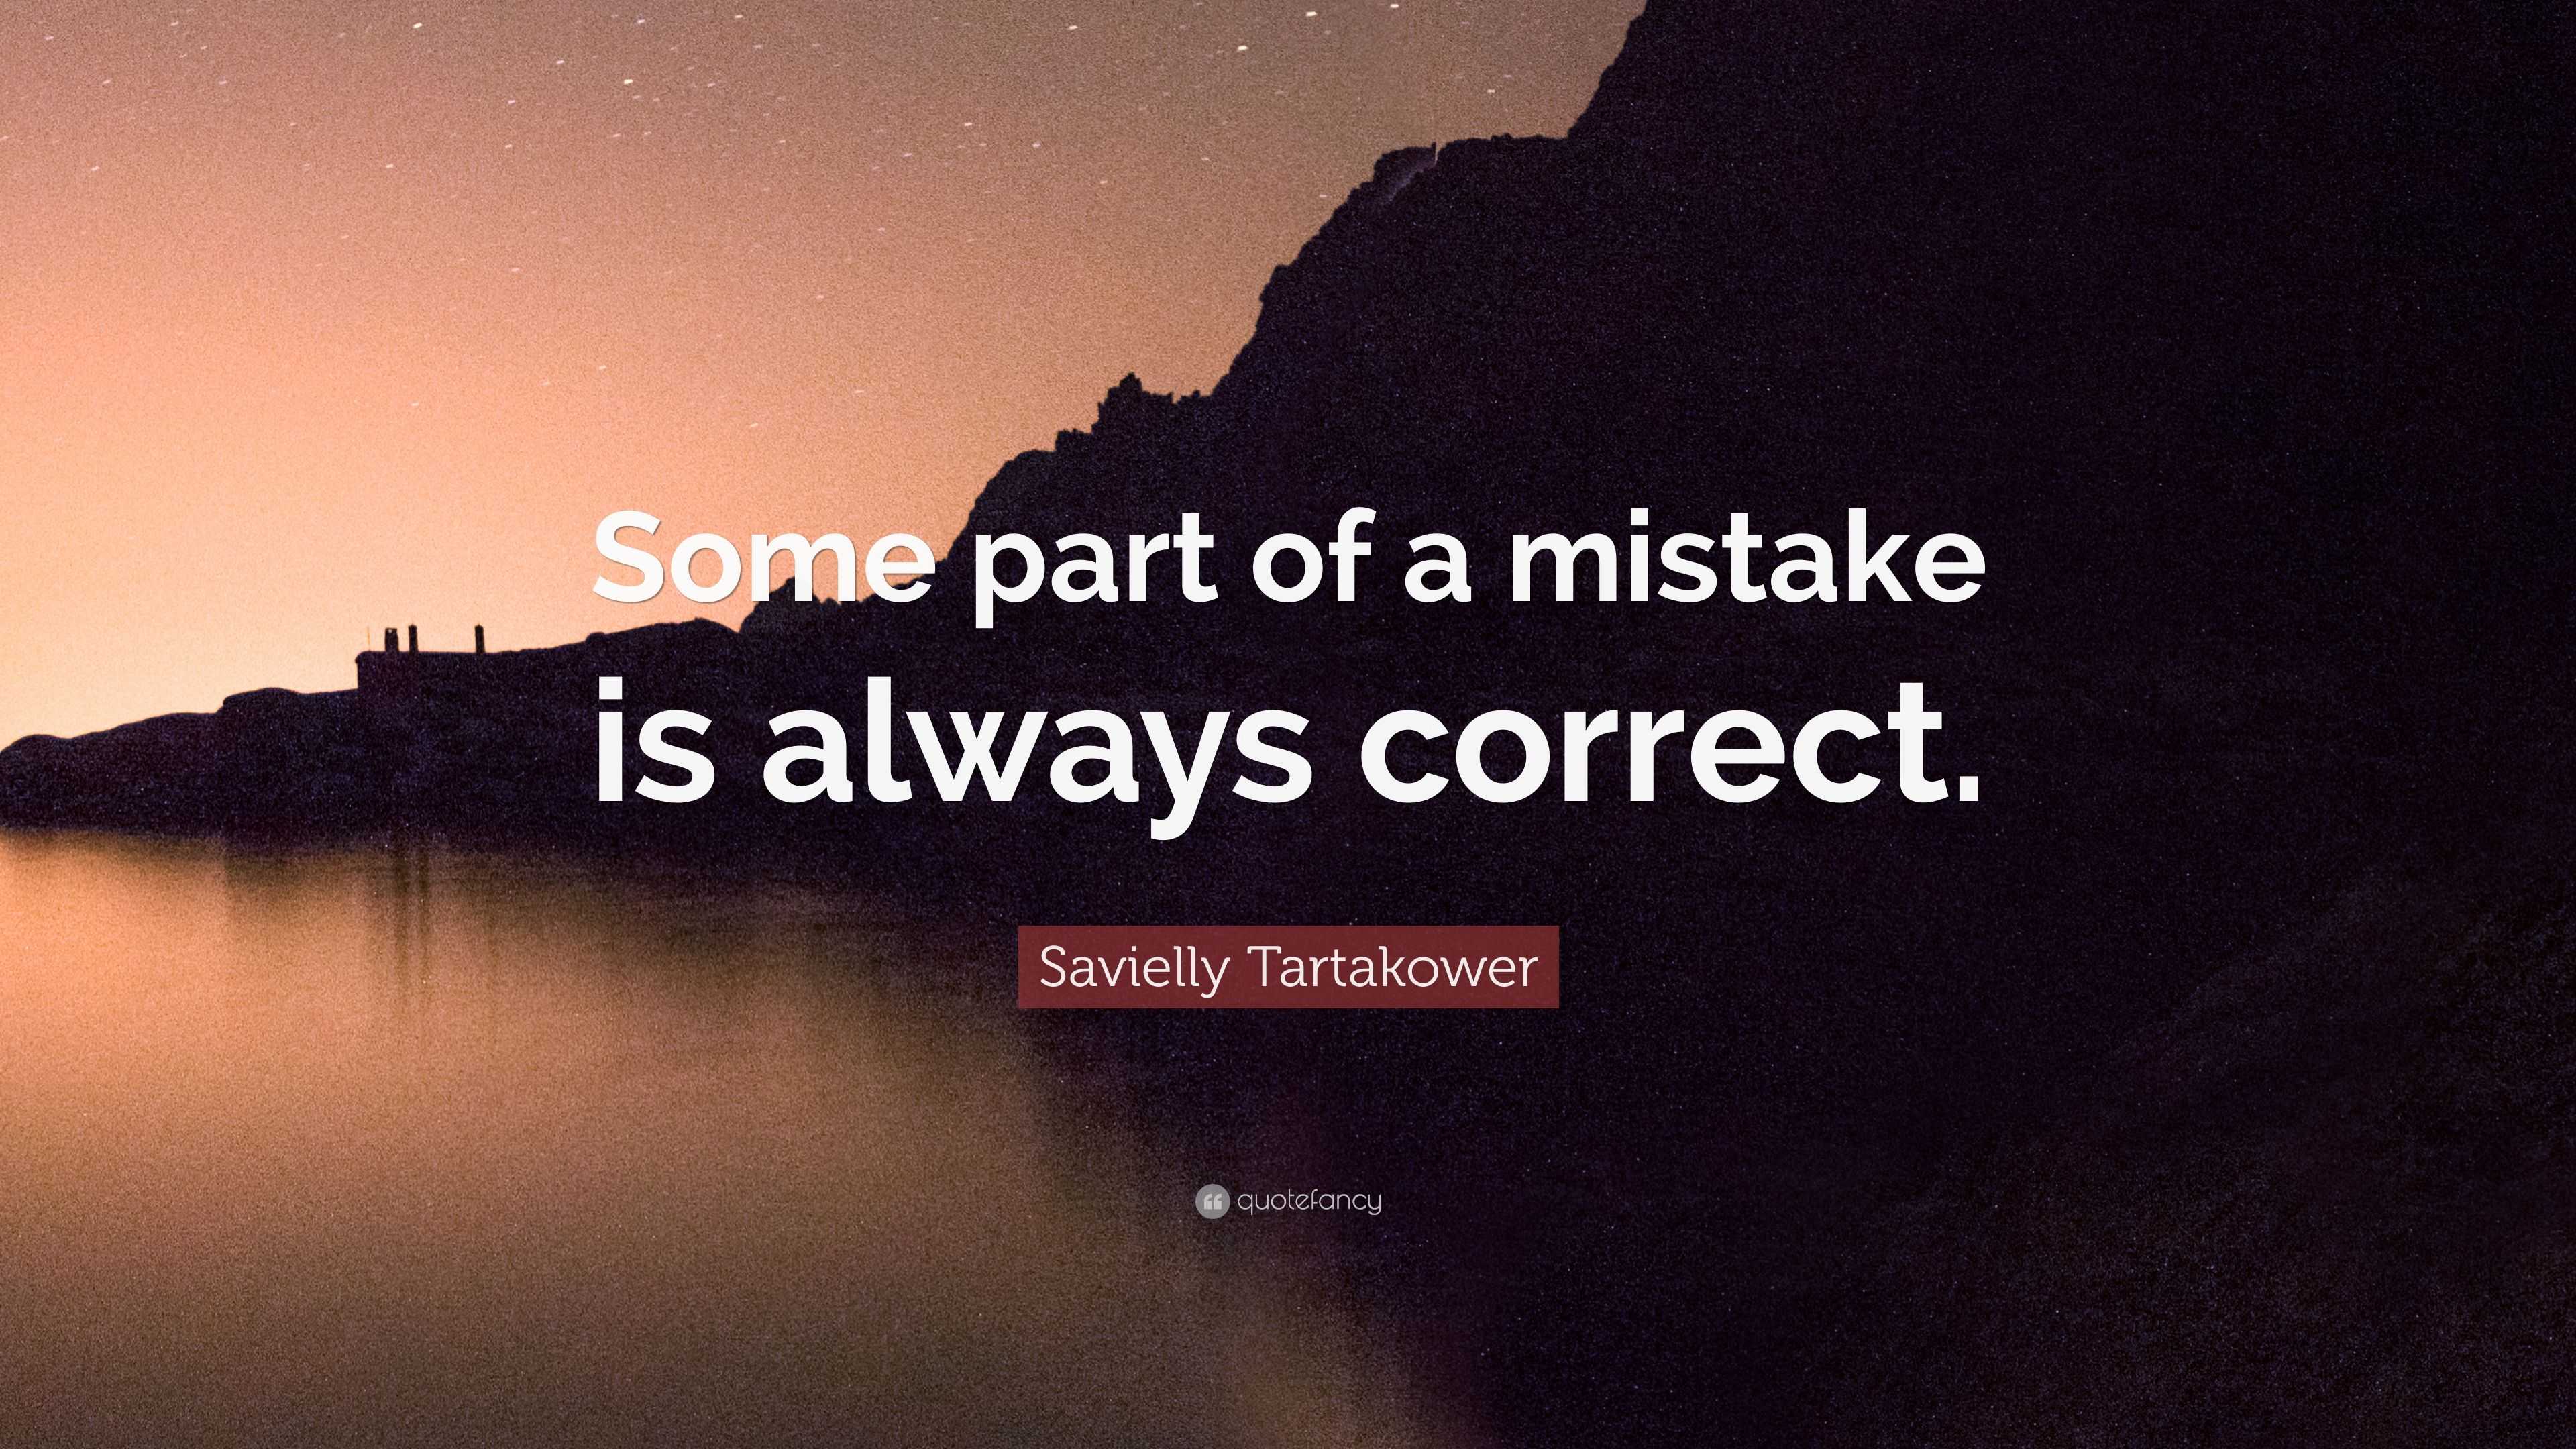 Savielly Tartakower Quote: “Some part of a mistake is always correct.”